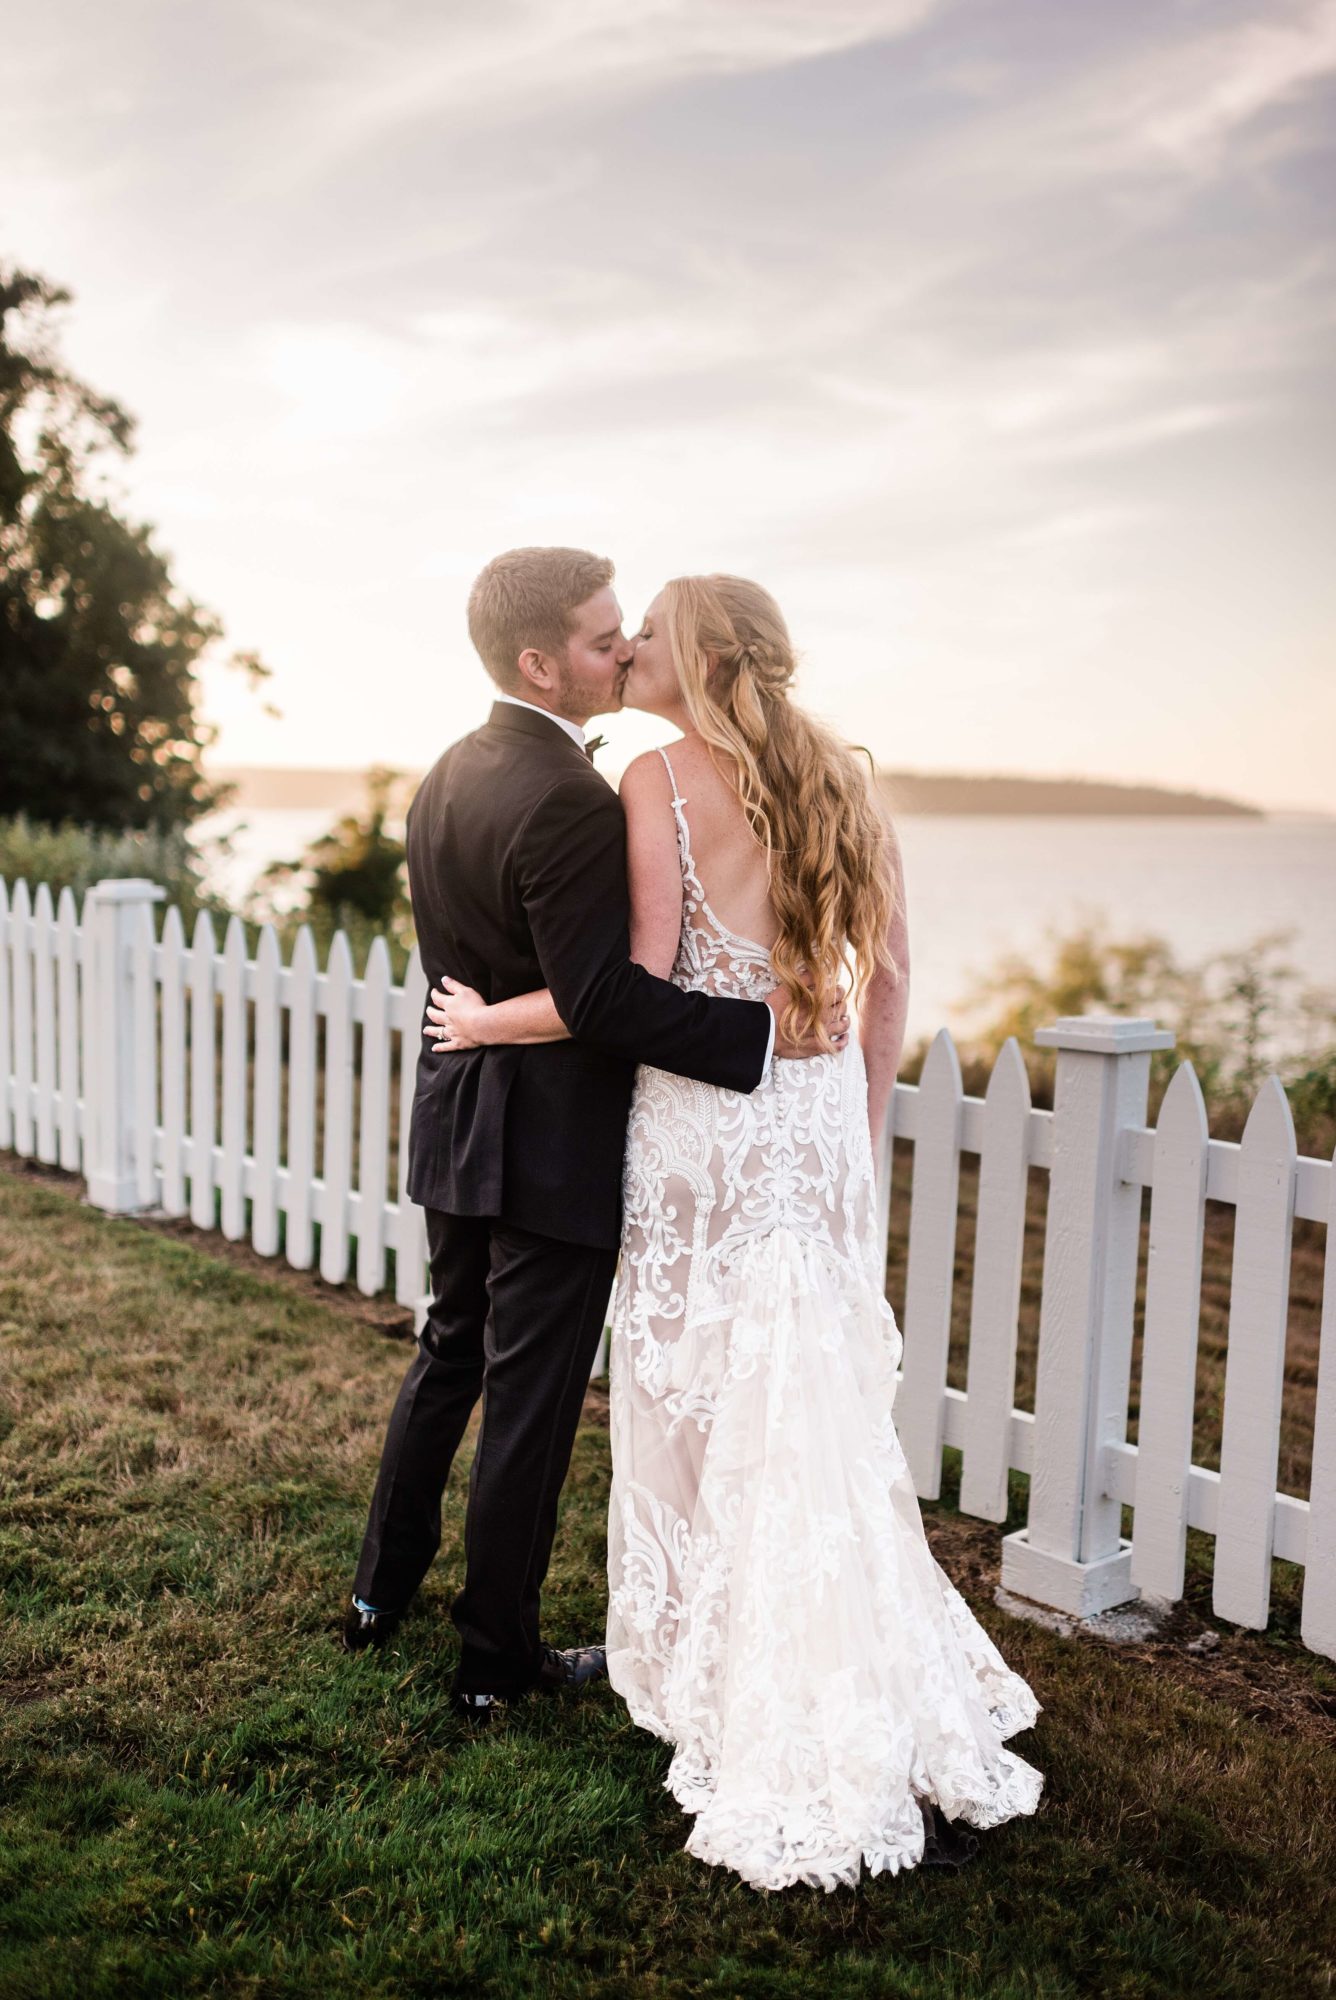 Sunset photos of Bride and Groom at Port Gamble Wedding Venue